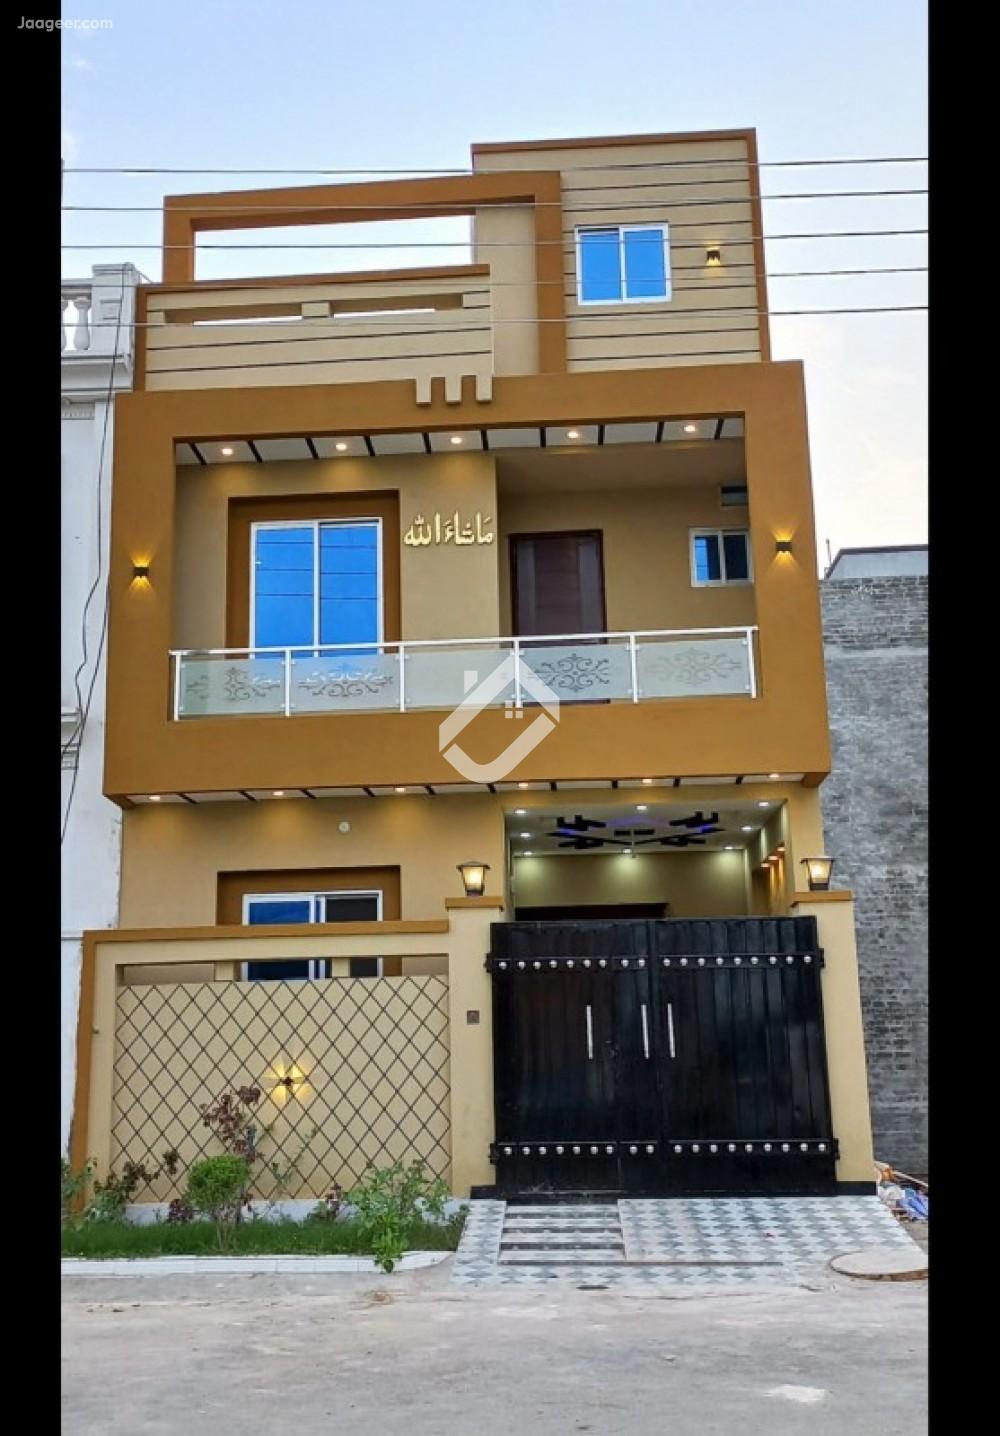 Main image 3 Marla Double Storey House For Sale In Bismillah Housing Scheme GT Road GT Road